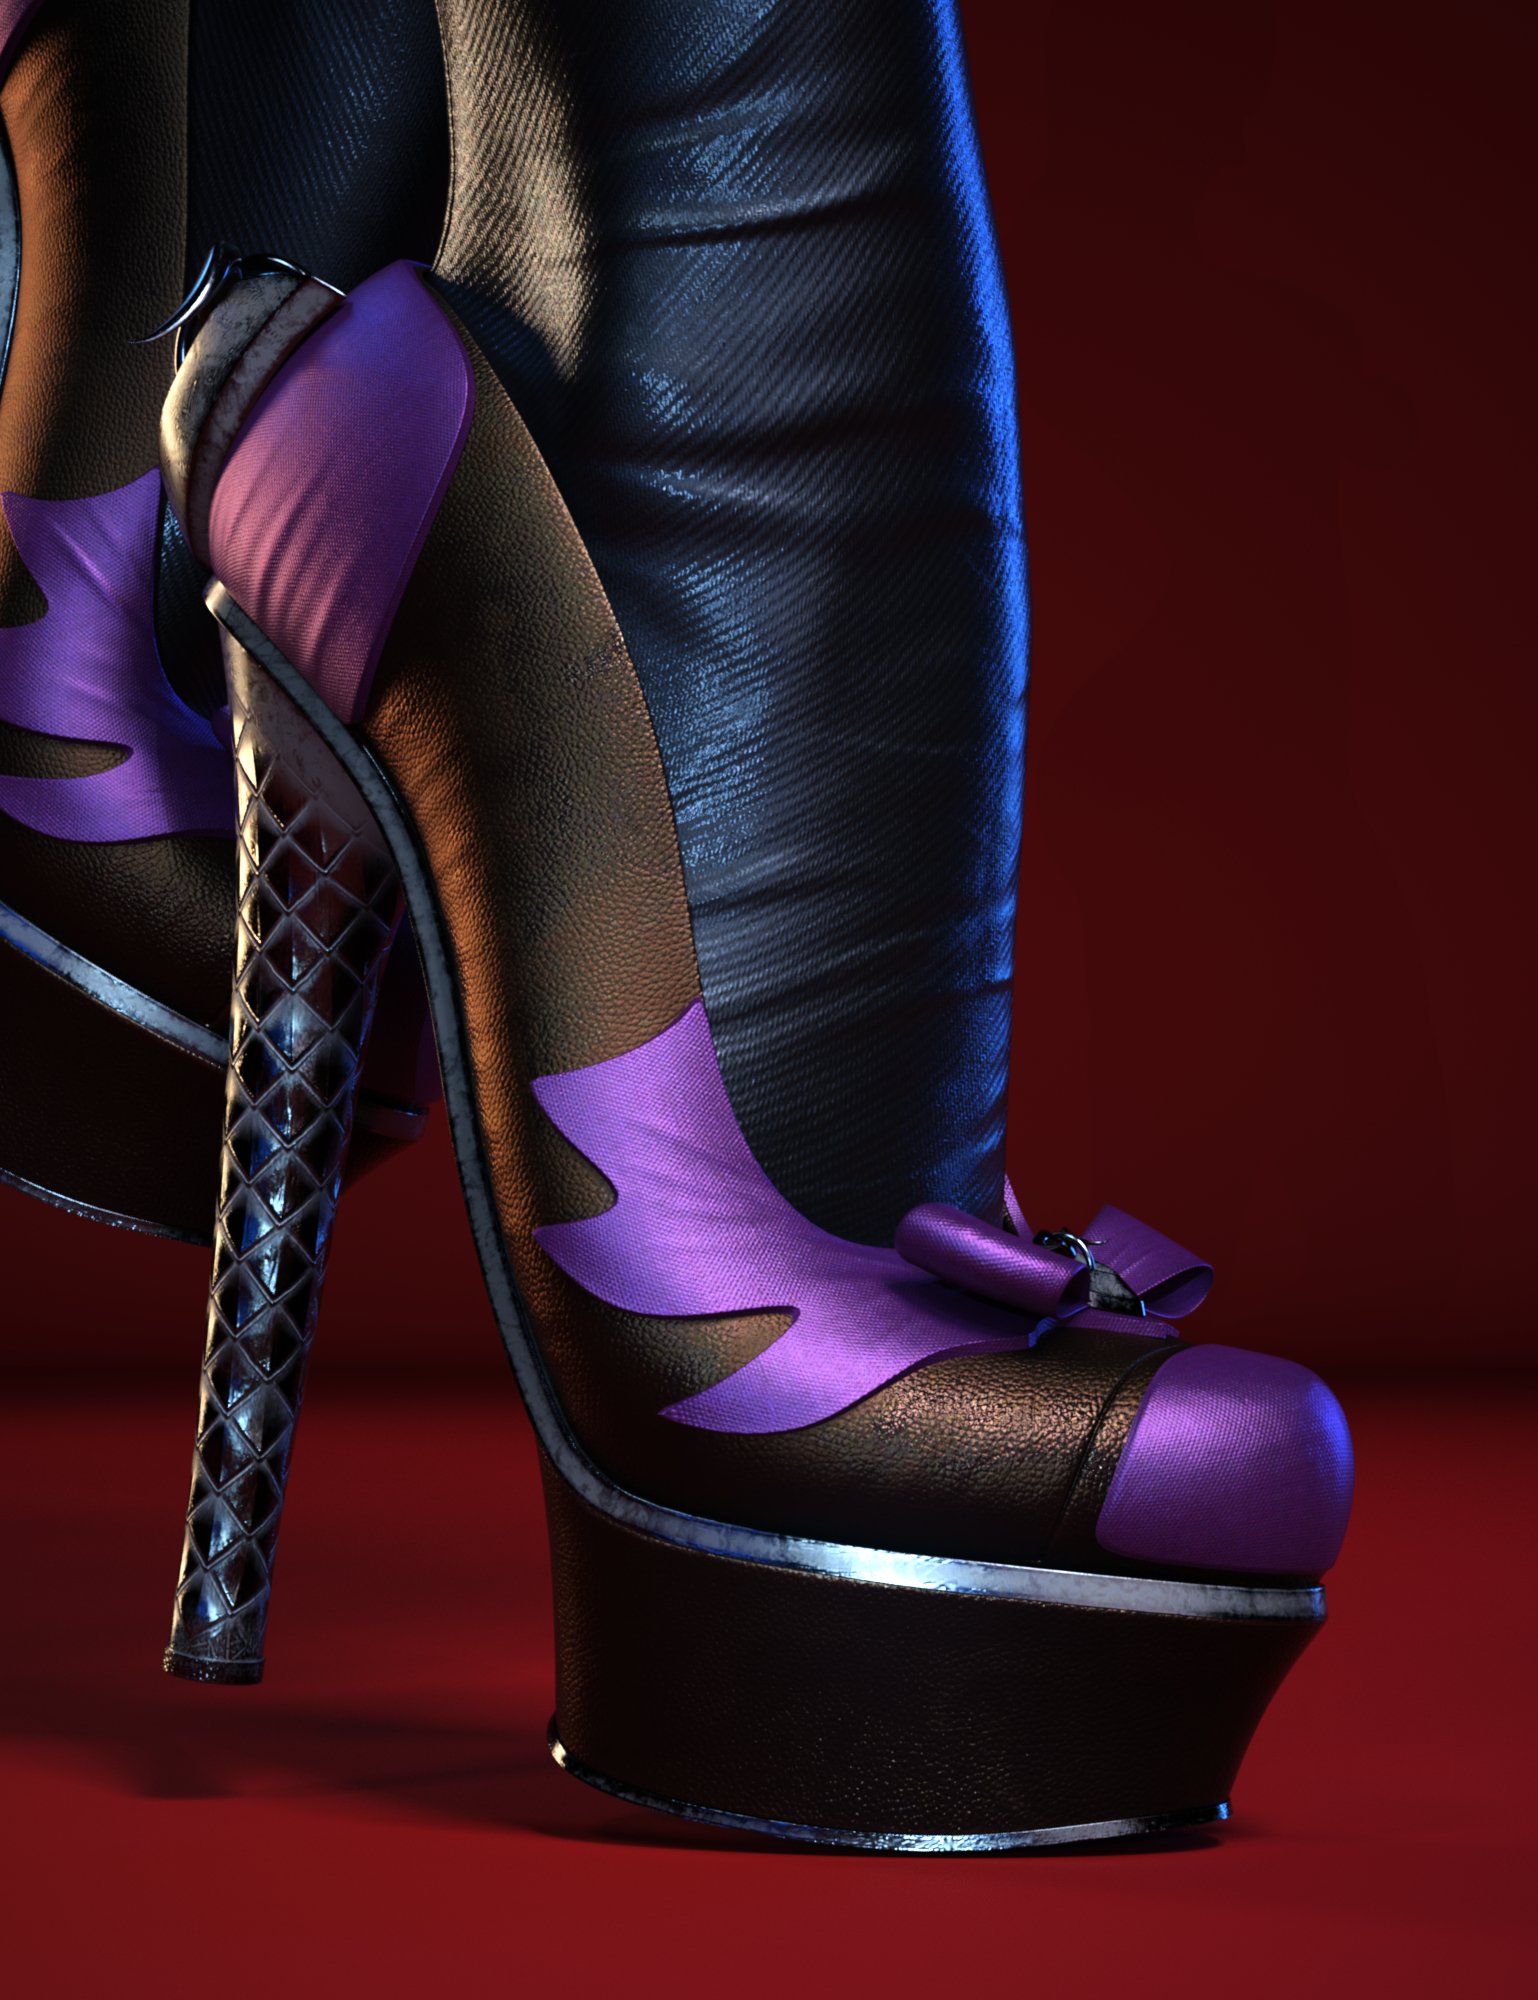 Dark Nun Shoes for Genesis 8 and 8.1 Females by: HM, 3D Models by Daz 3D